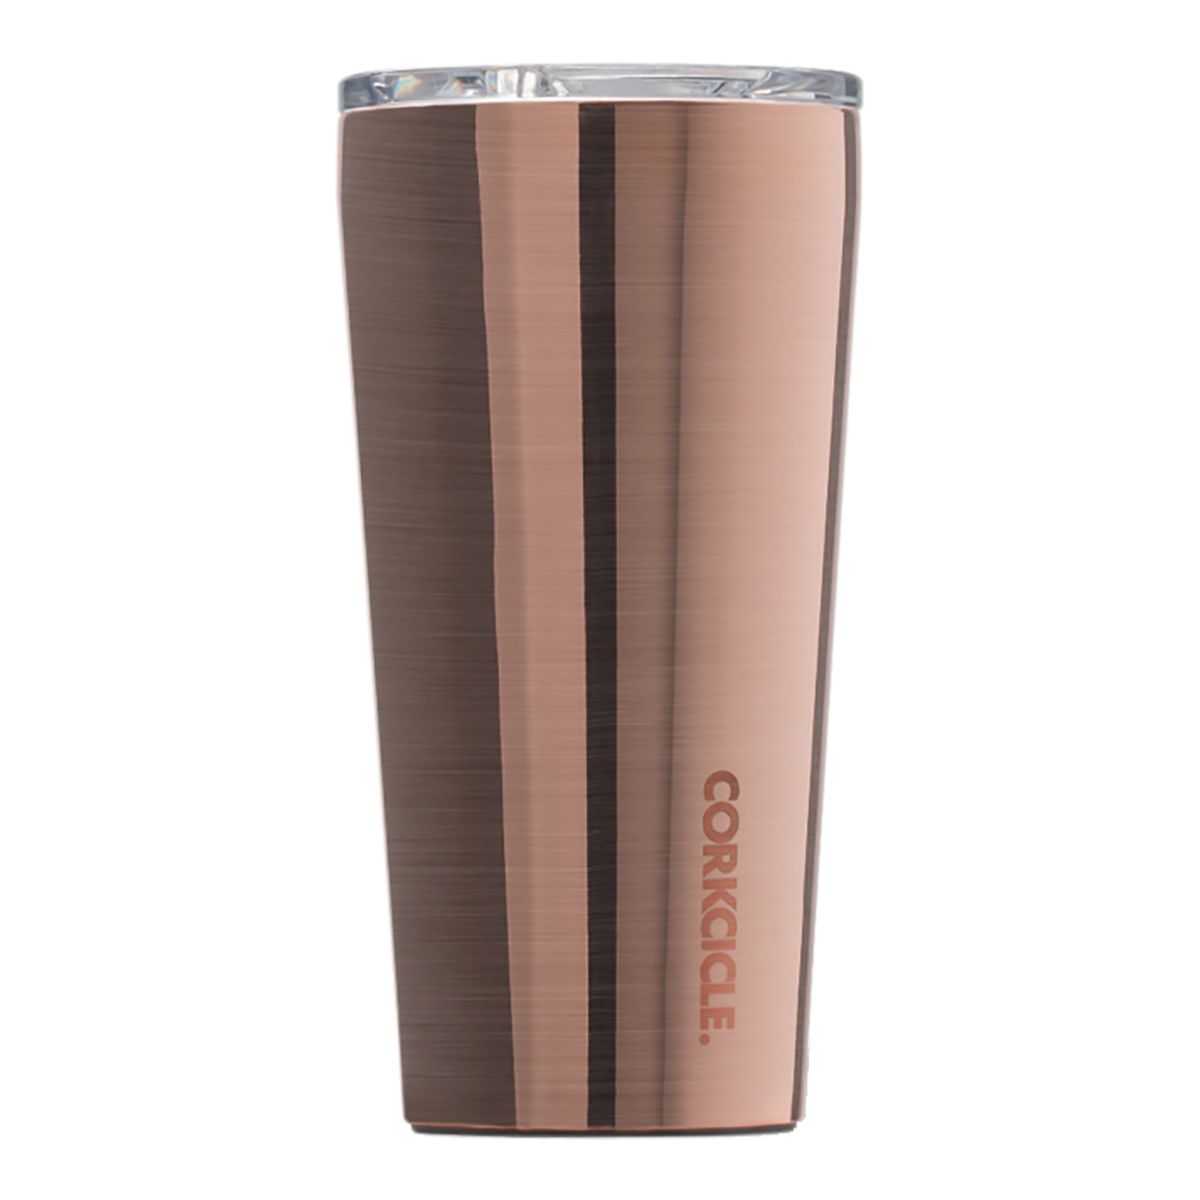 Corkcicle Latte Stainless Steel Sport Canteen, 20 oz. - Insulated Tumblers  - Hallmark